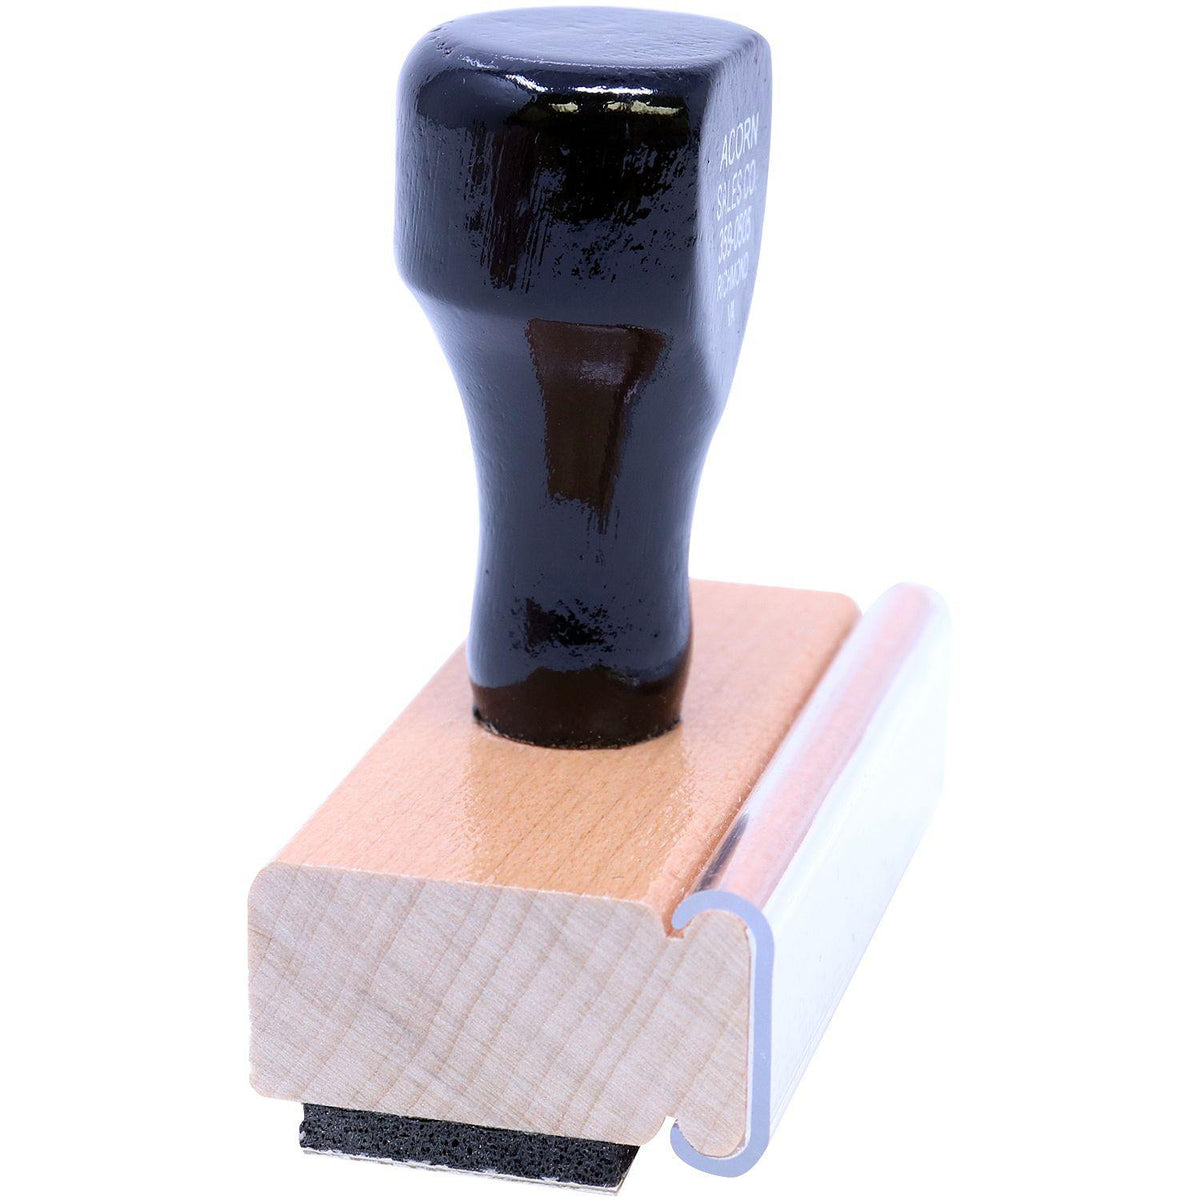 Side View of Large PTO Rubber Stamp at an Angle